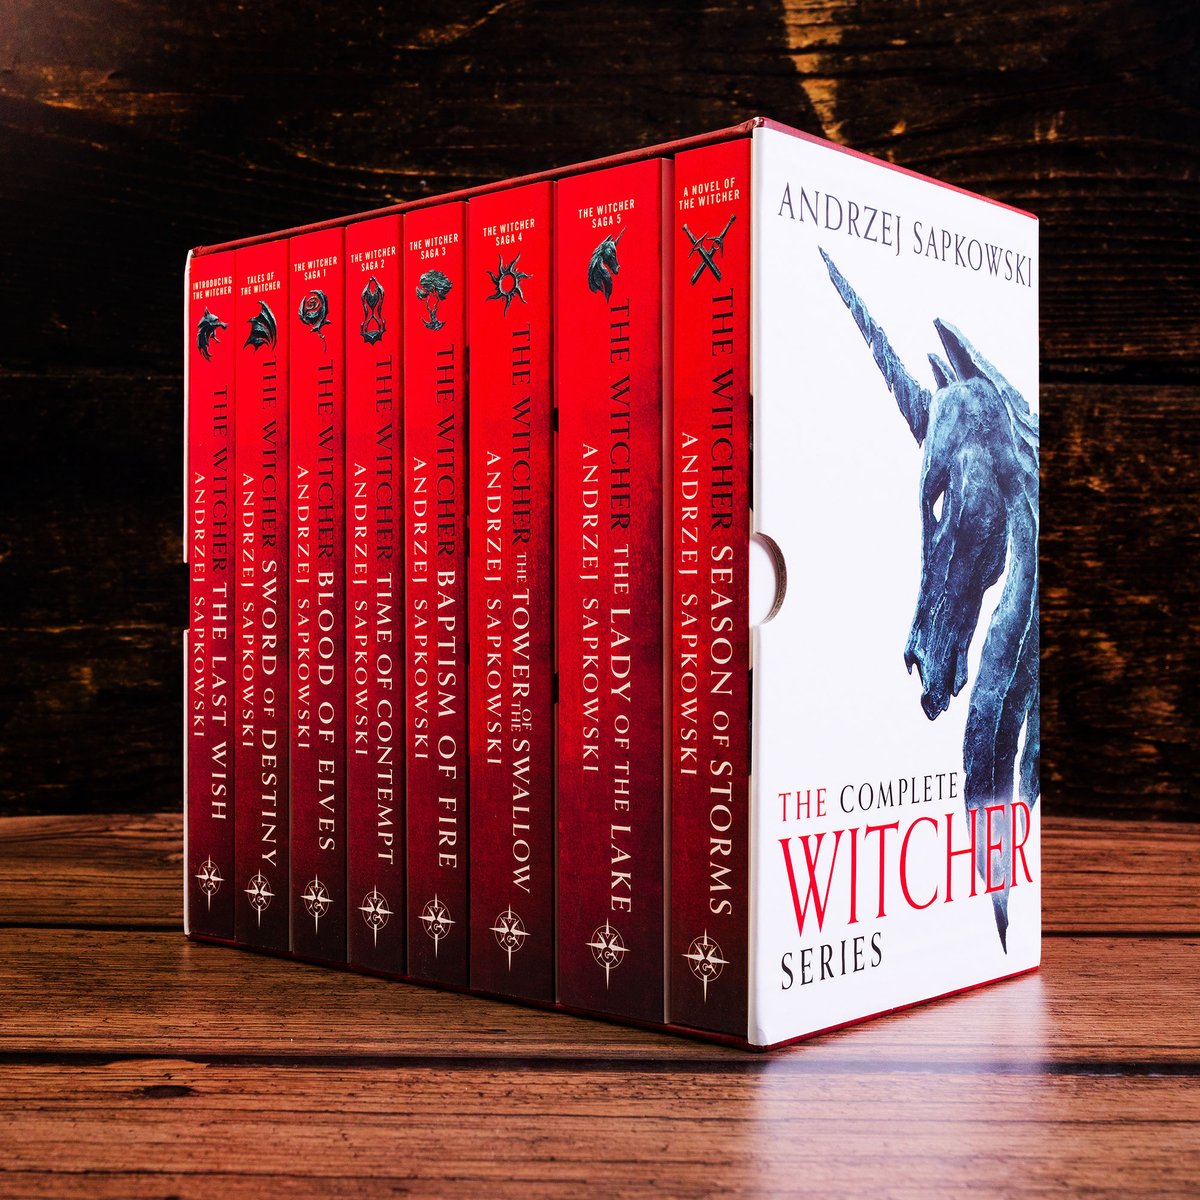 Discover one of @Forbes' top book series of all time. Andzrej Sapkowski's global bestselling #Witcher series. Start your journey today: brnw.ch/21wIYx5